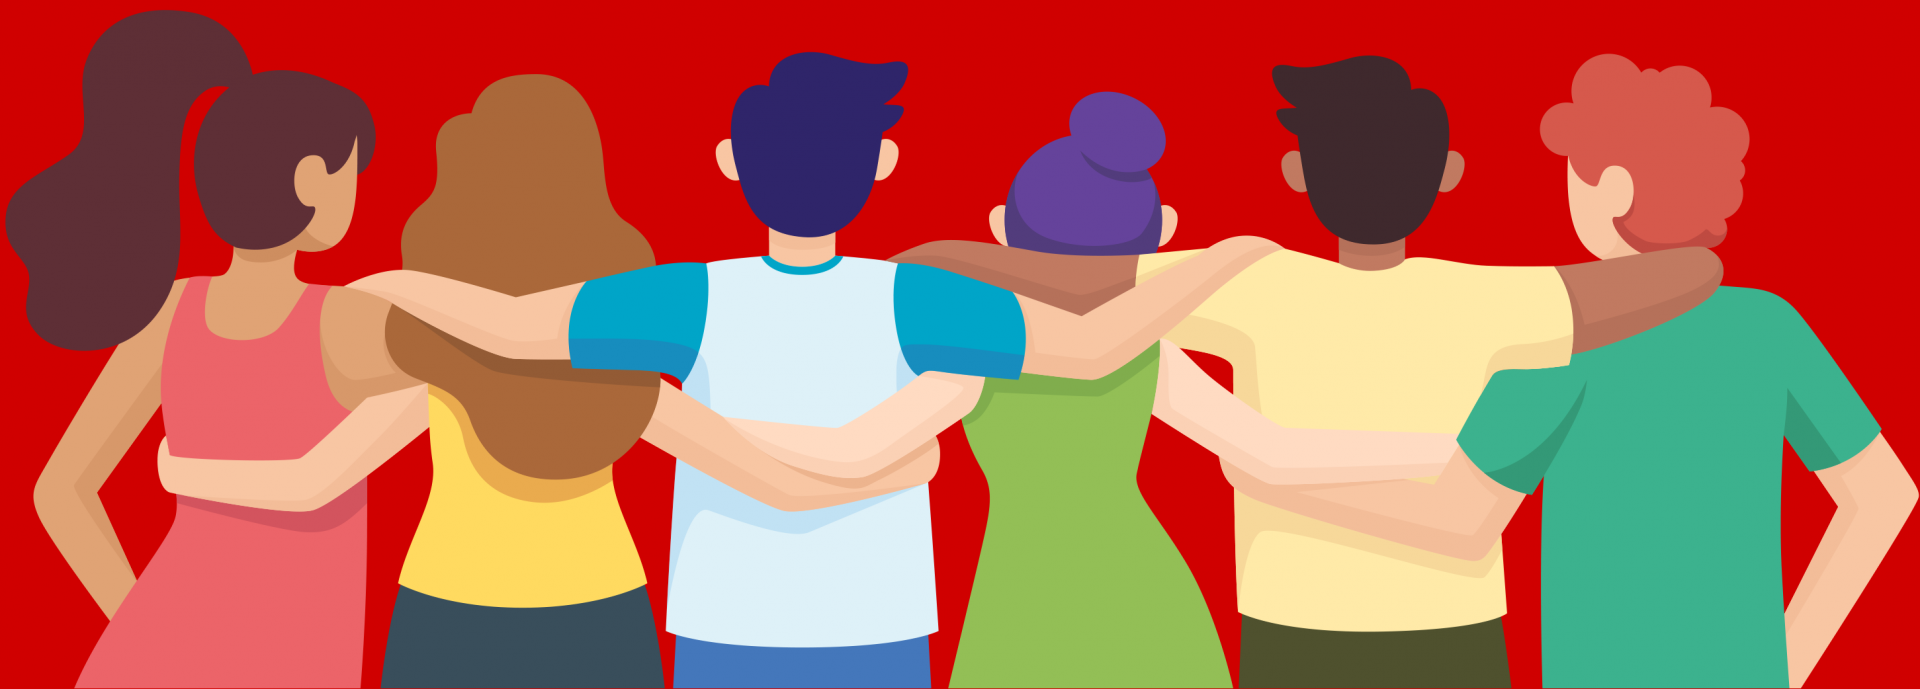 illustration of a group of diverse people with arms around one another's shoulders..